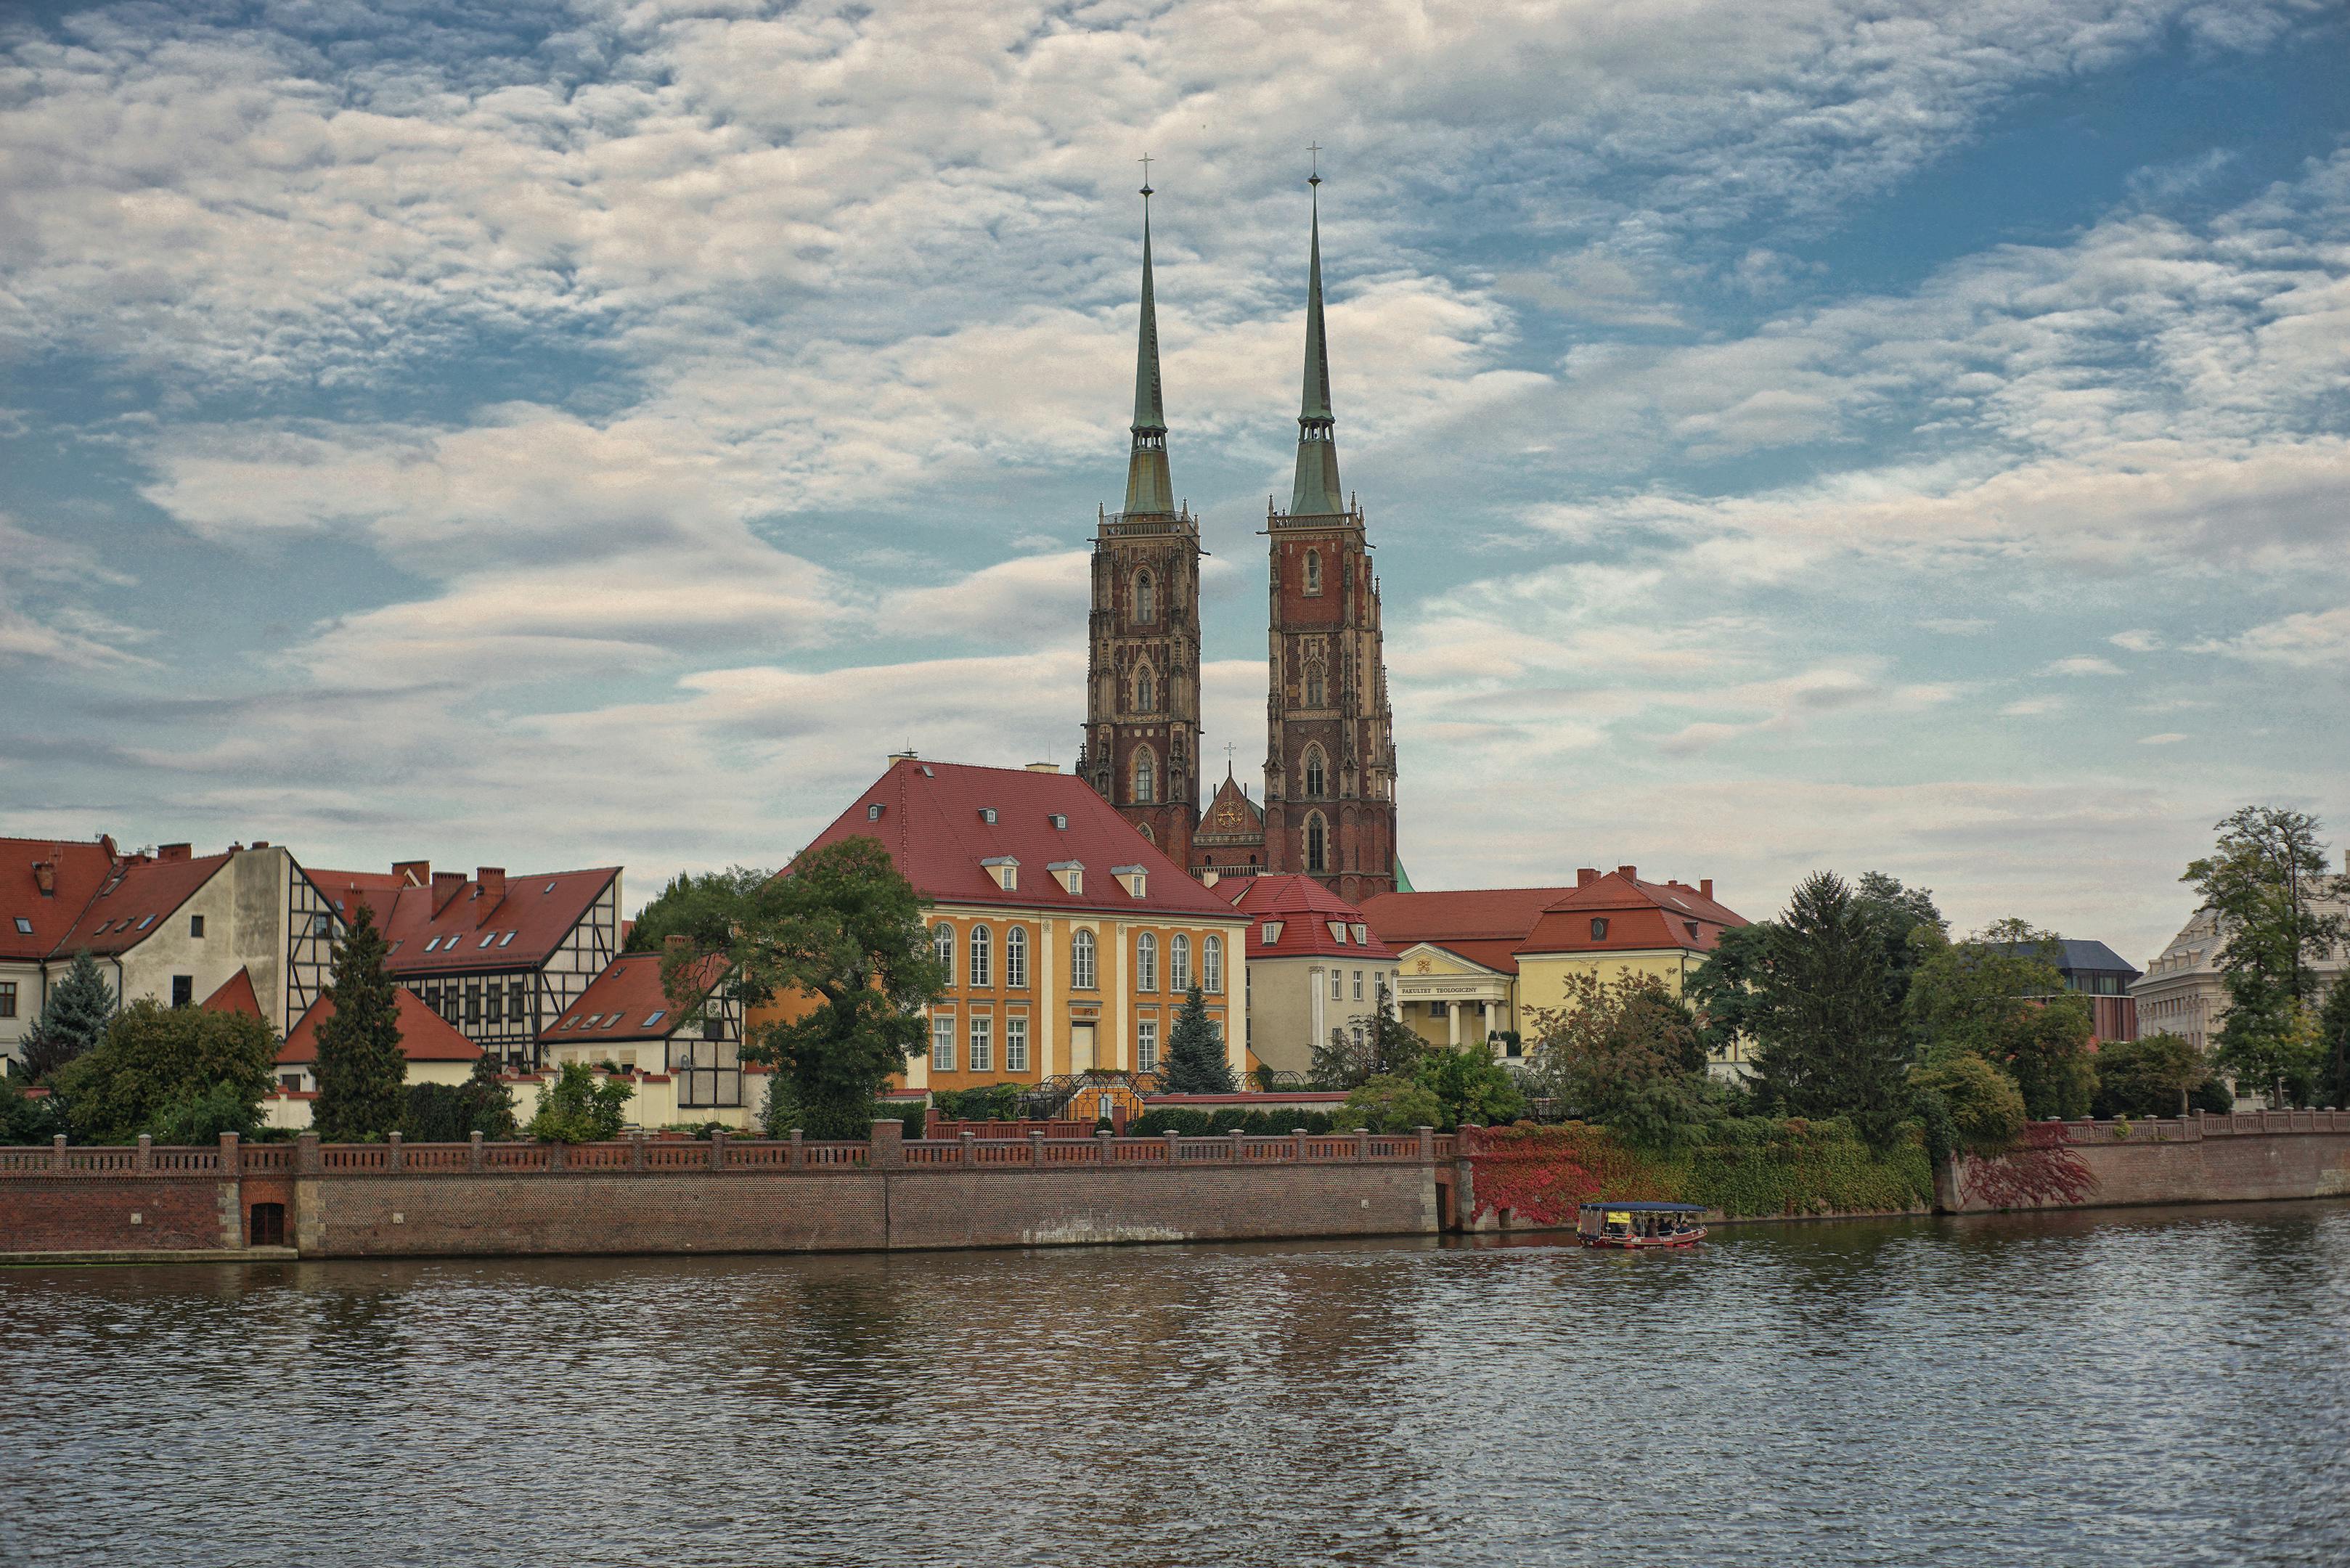 60+ Free Wroclaw Panorama & Wroclaw Images - Pixabay